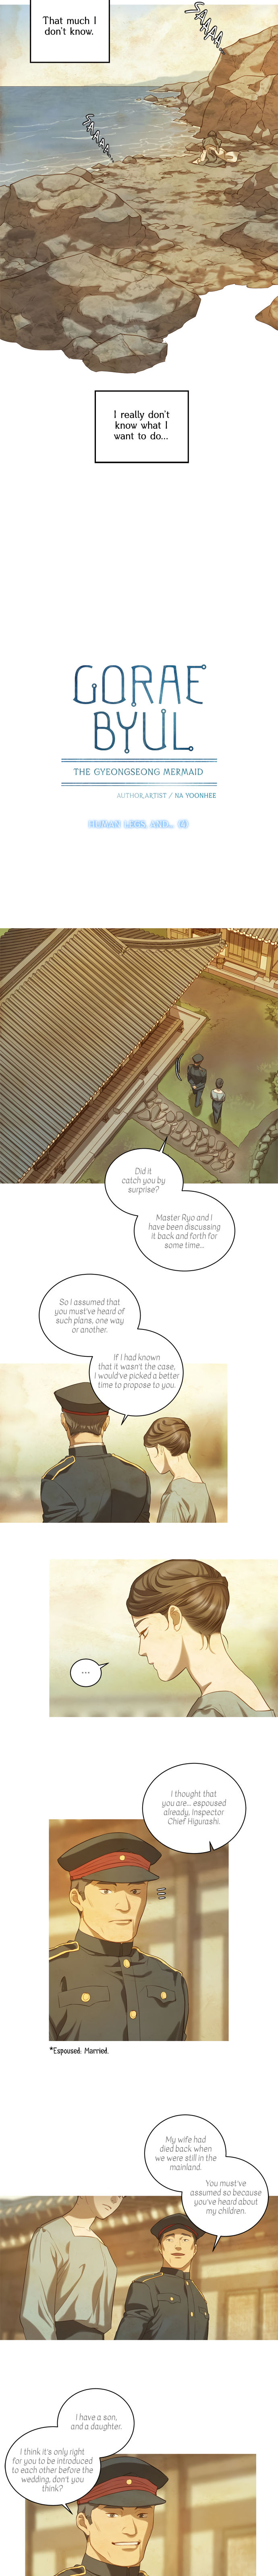 Gorae Byul - The Gyeongseong Mermaid - Chapter 12 Page 4